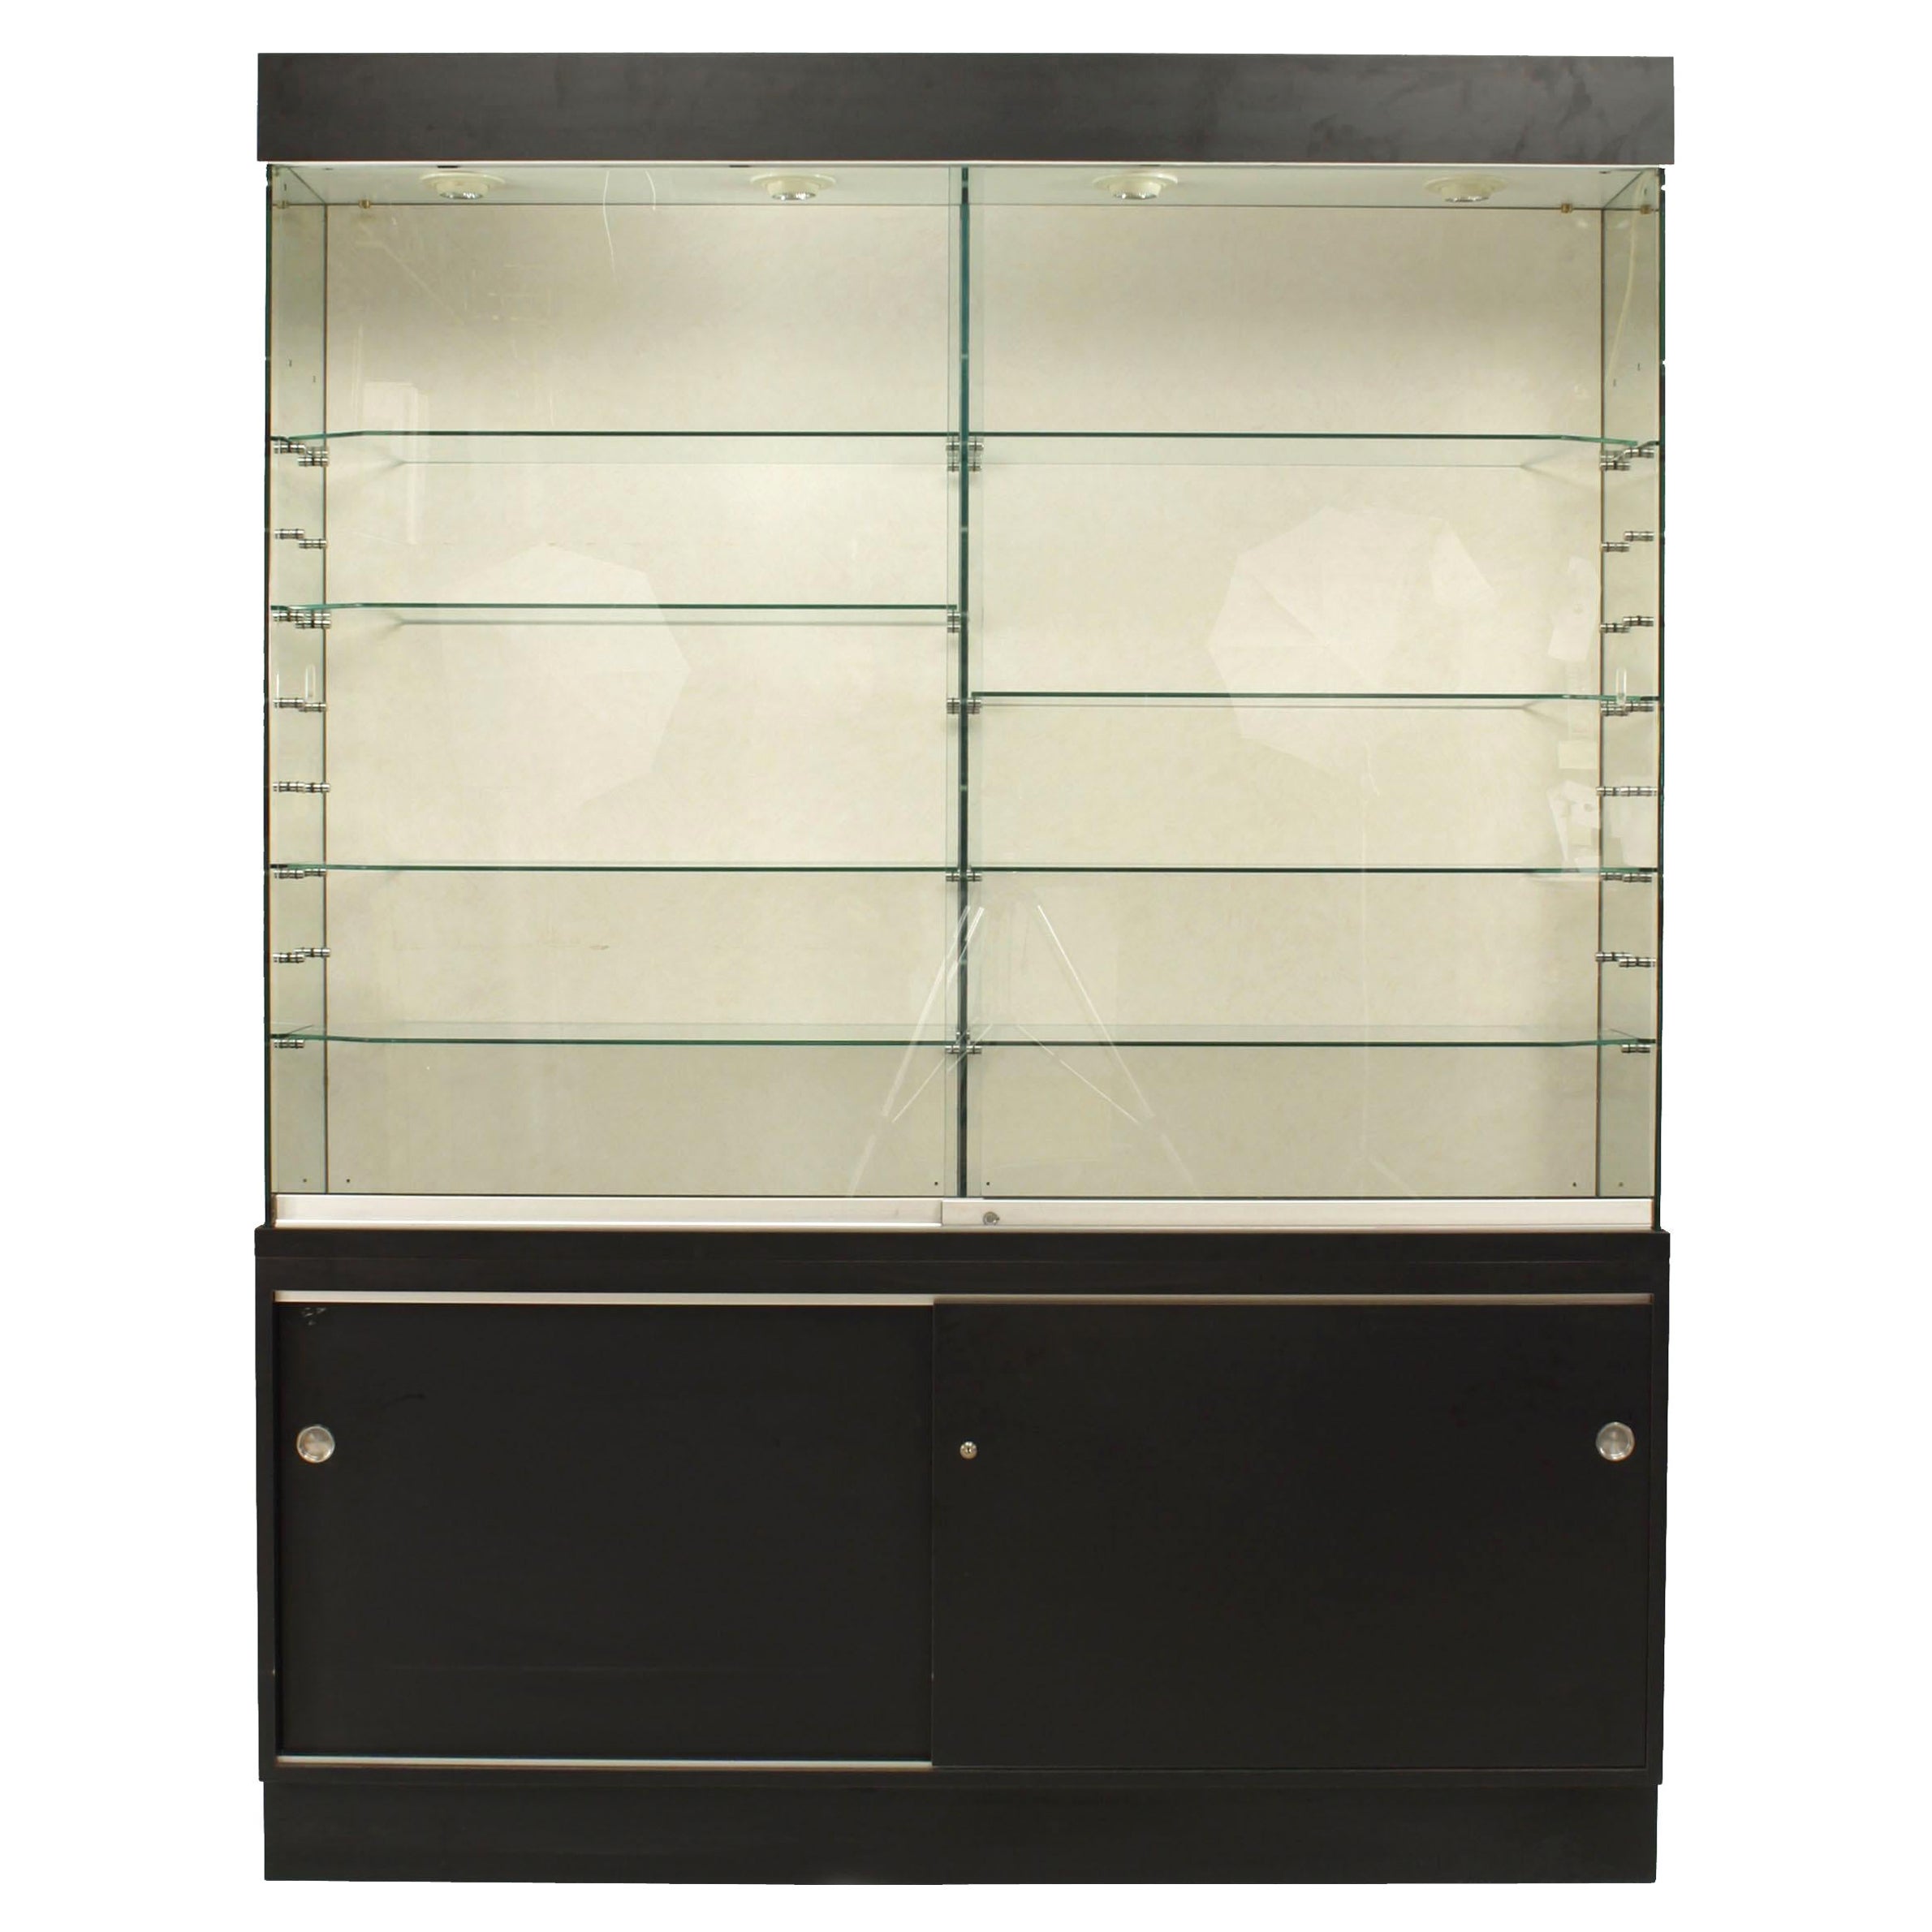 Modern Steel and Glass Showcase Cabinet